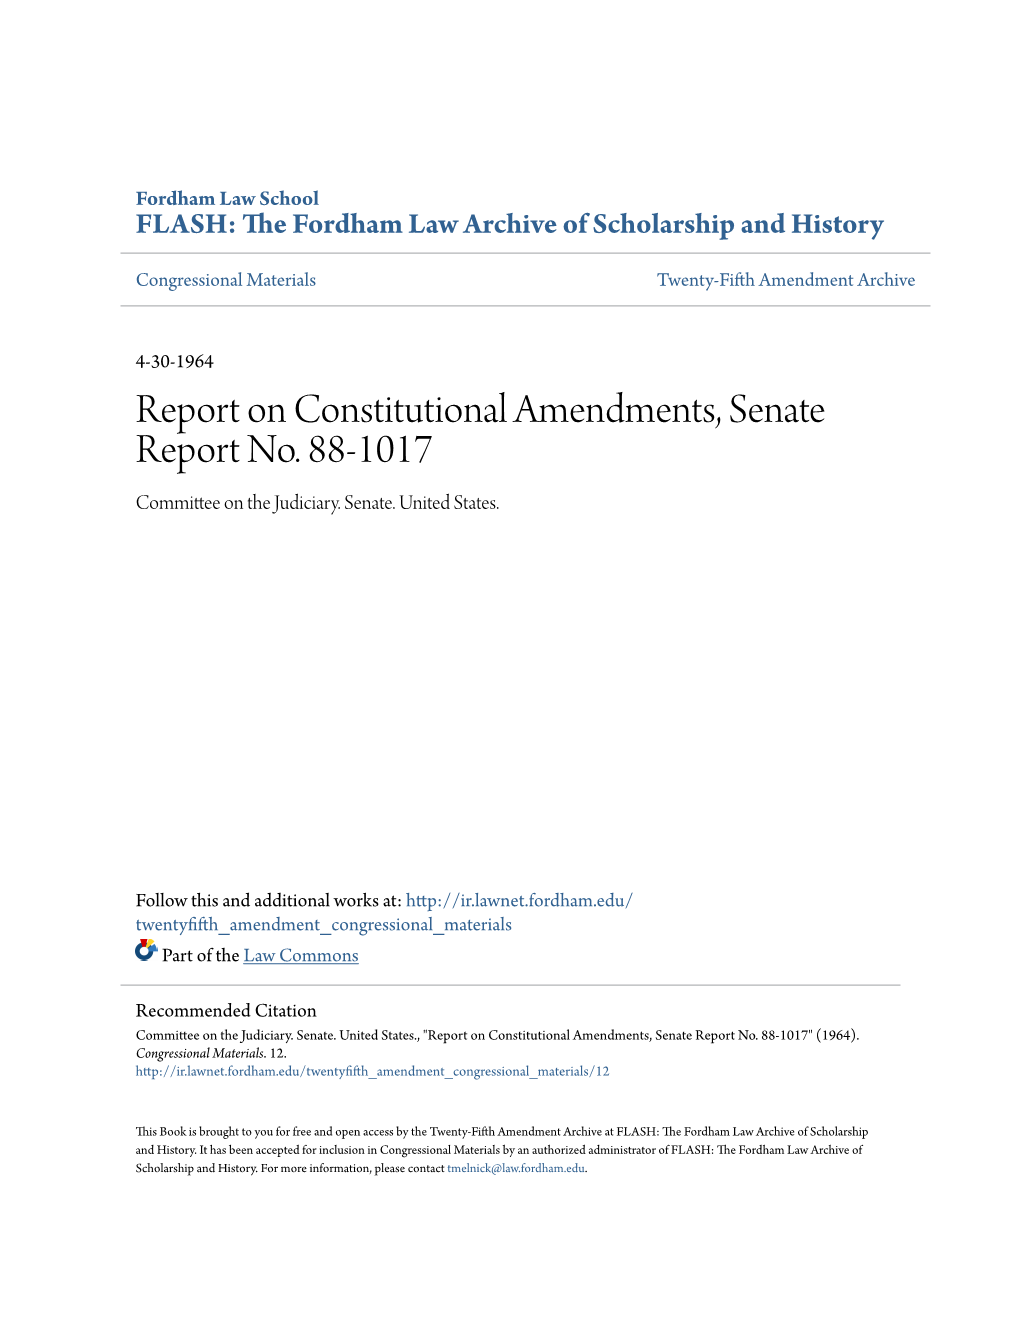 Report on Constitutional Amendments, Senate Report No. 88-1017 Committee on the Judiciary